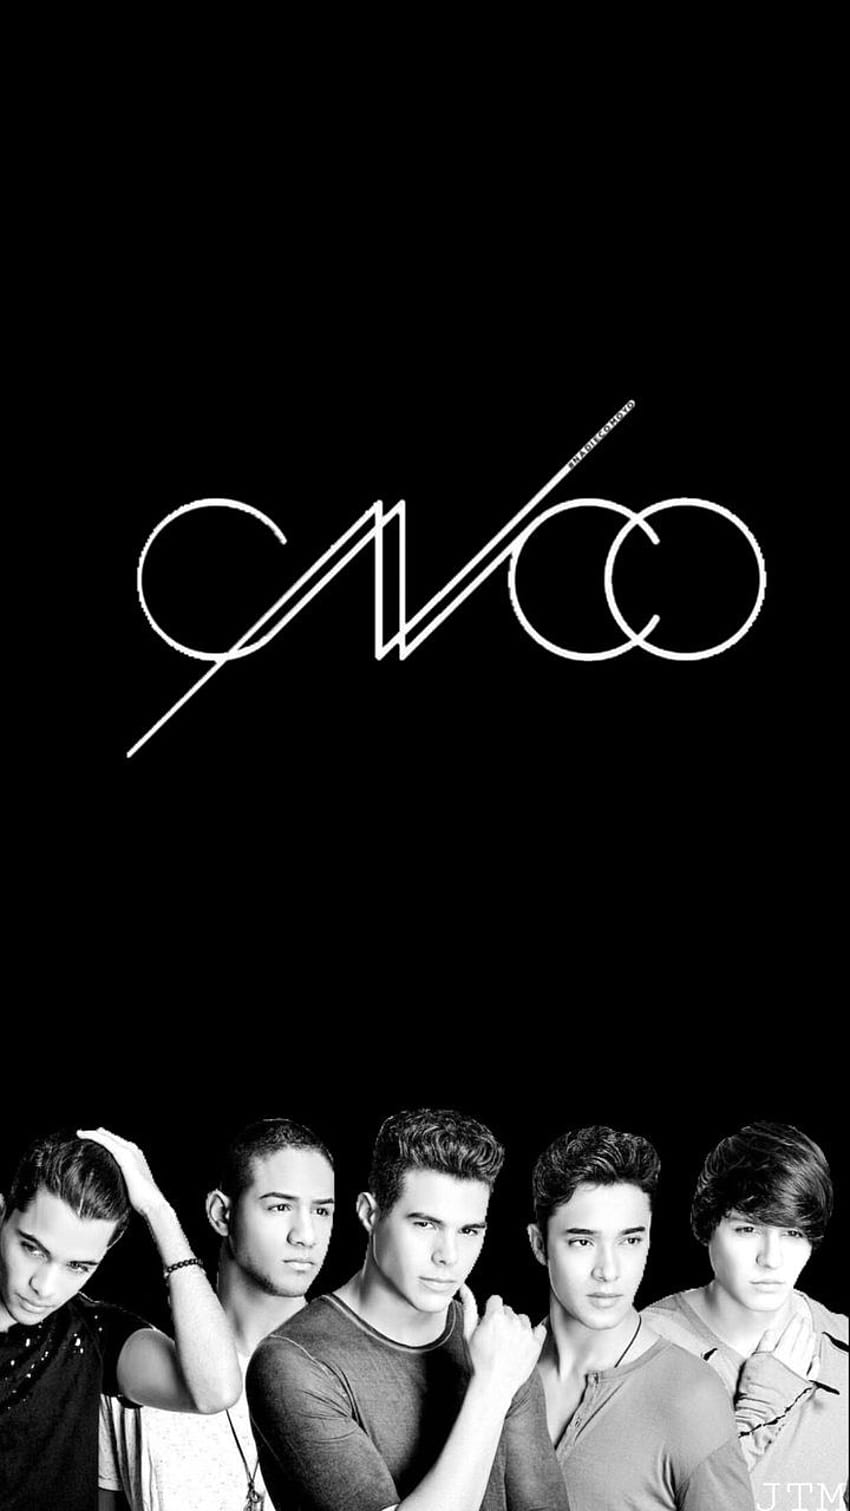 New Cnco wallpaper pictures